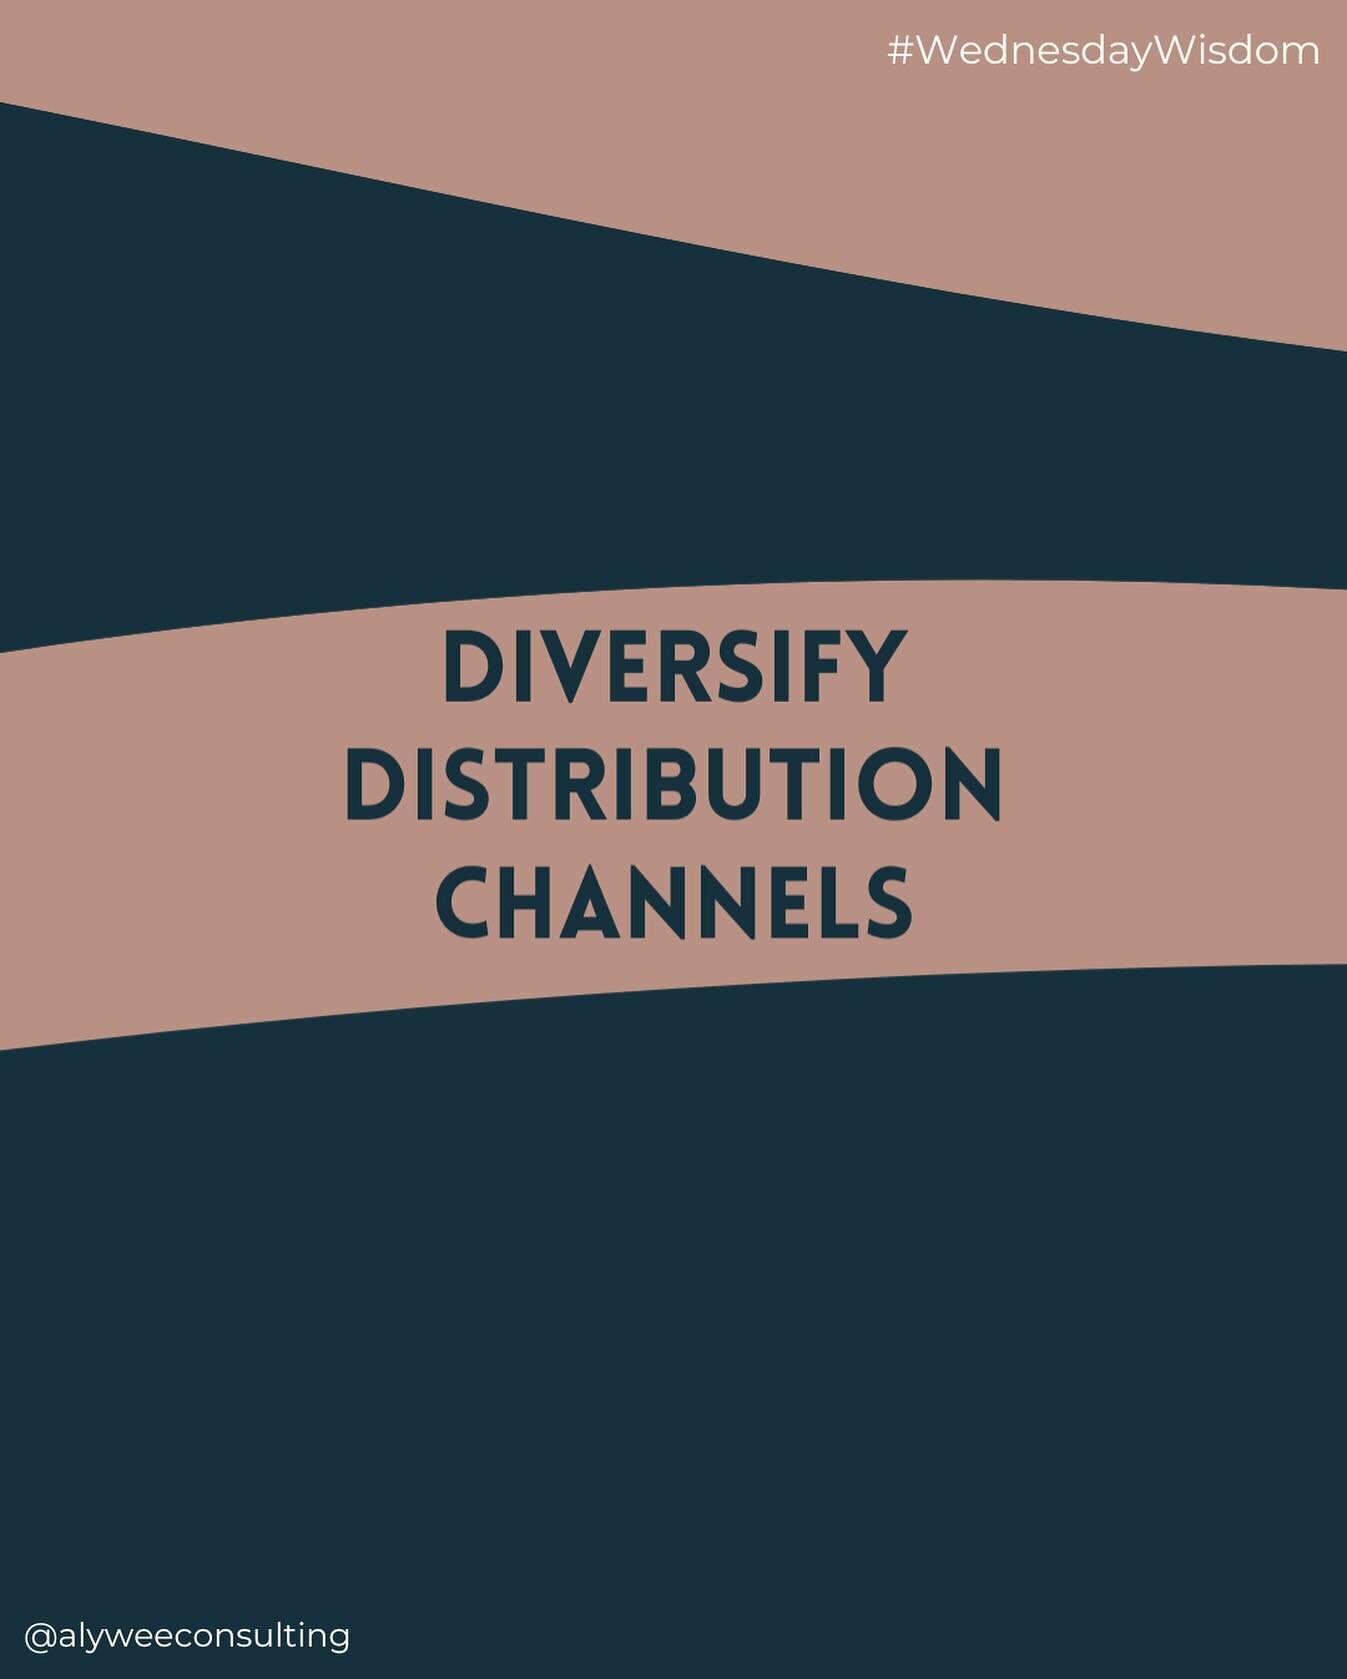 #WednesdayWisdom: Explore diverse distribution channels to expand your hotel&rsquo;s reach.
 
🌐 A well-rounded distribution strategy ensures your rooms are visible to potential guests across various online platforms. 
 
#AlyWeeConsulting #HotelReven